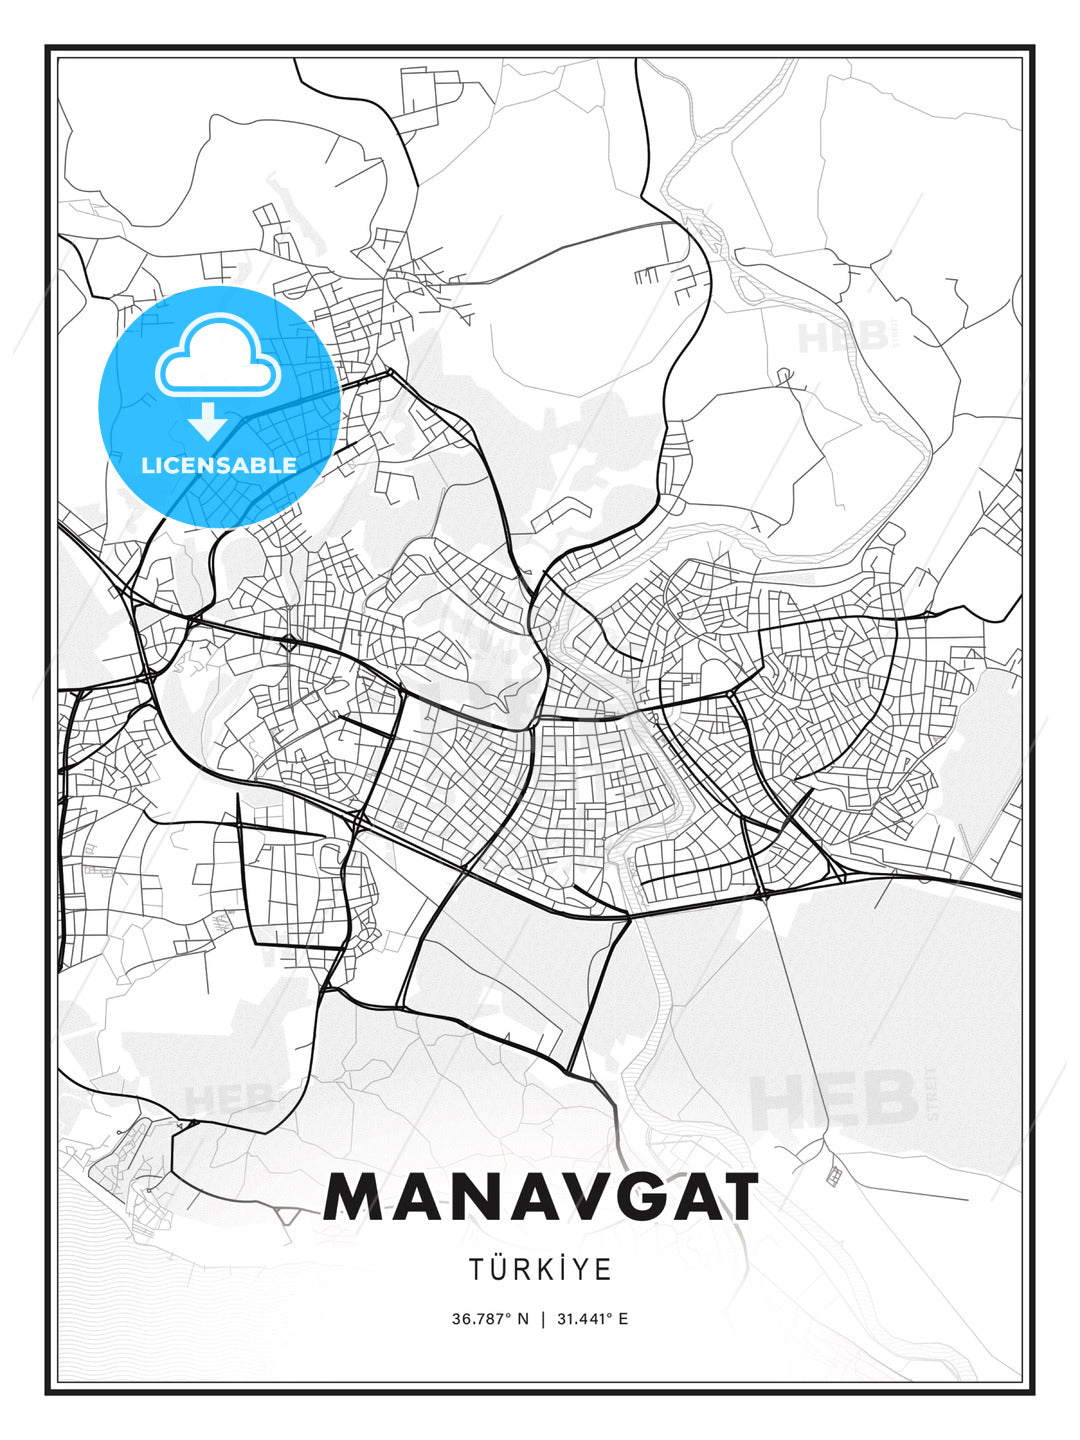 Manavgat, Turkey, Modern Print Template in Various Formats - HEBSTREITS Sketches